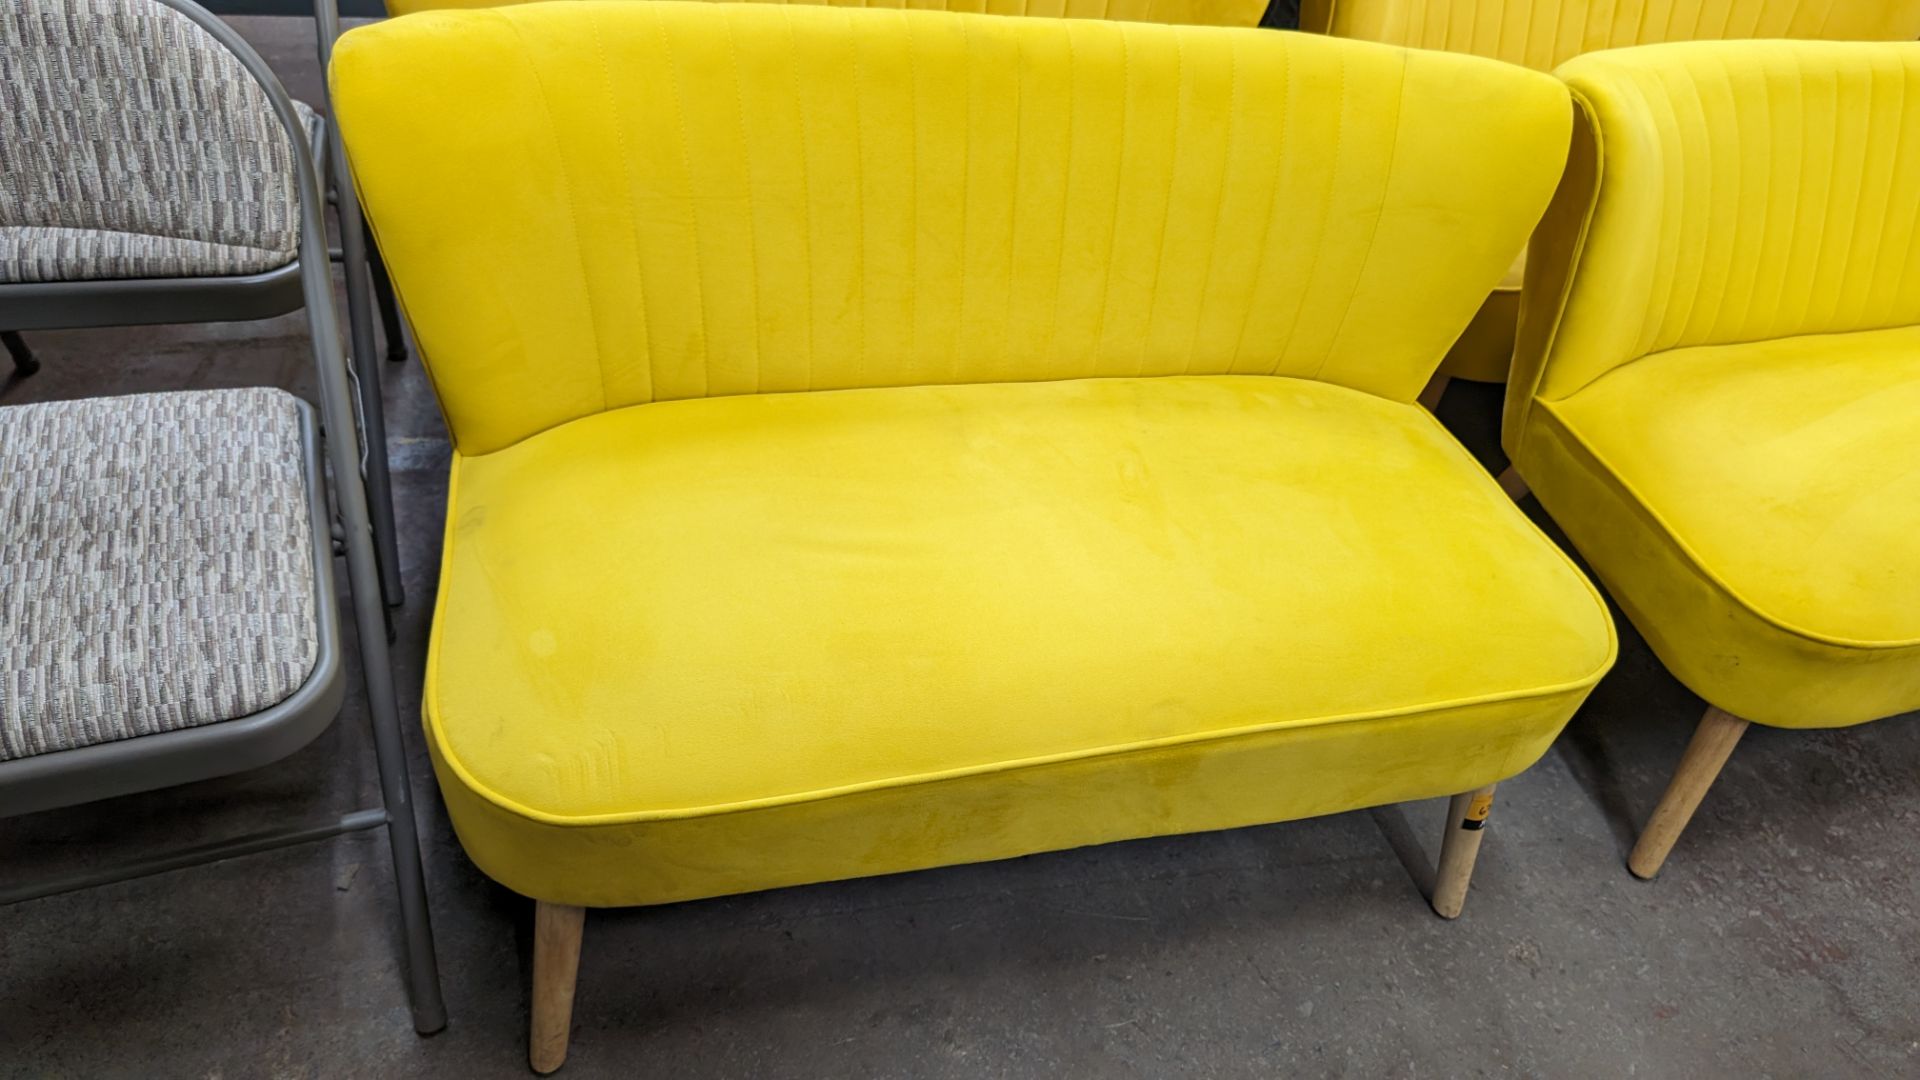 Pair of mustard yellow velour two-person small sofas, each measuring approximately 1120mm wide - Image 3 of 6